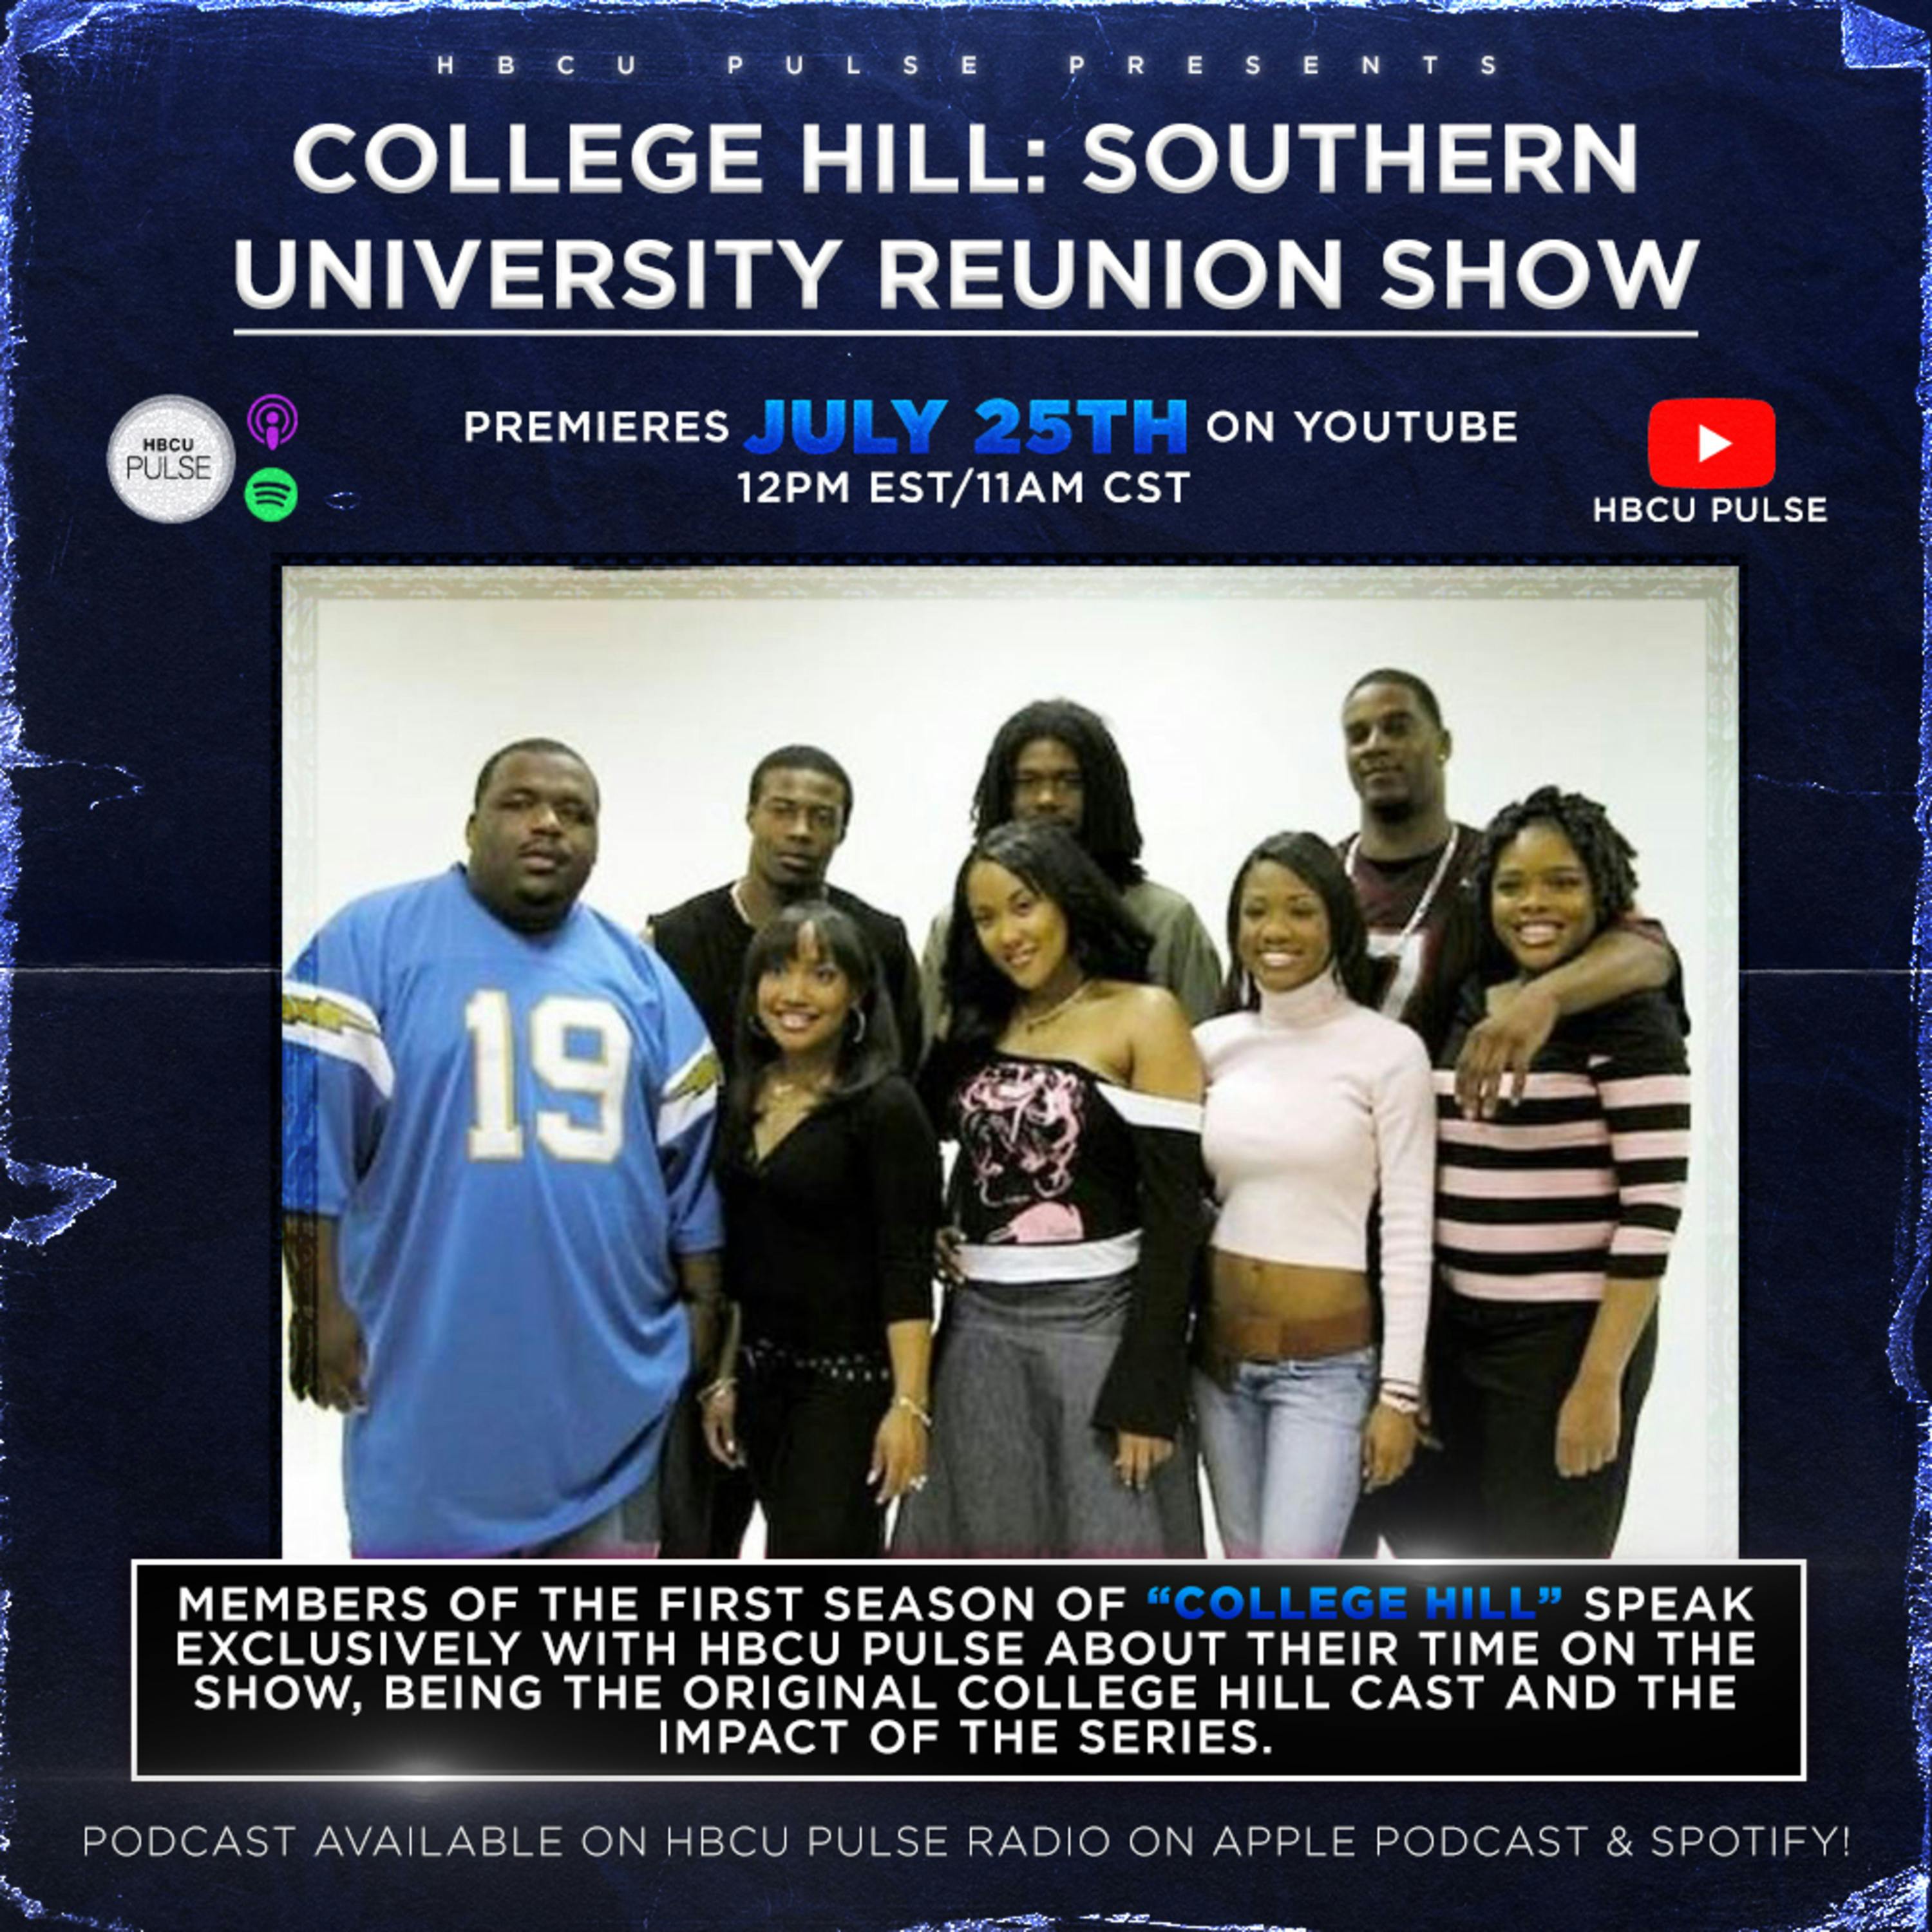 The College Hill: Southern University Season 1 Reunion (An HBCU Pulse Exclusive)